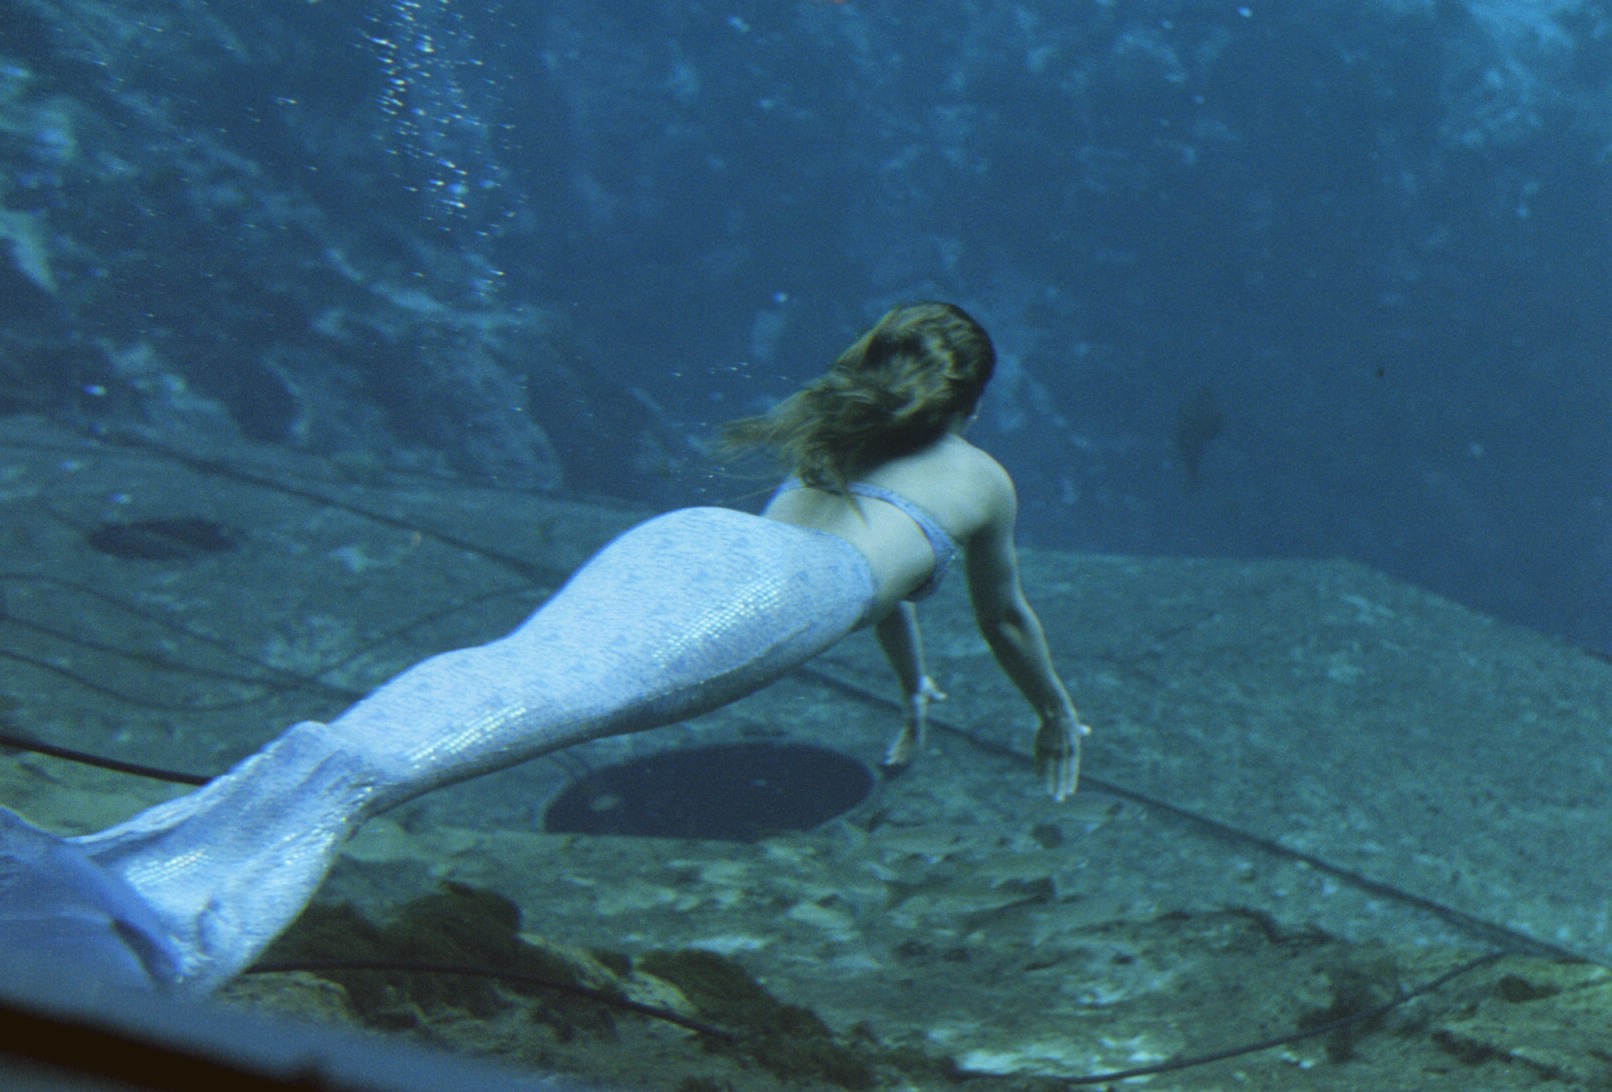 Rmation About Mermaids Or Even Videos Related To Mermaid